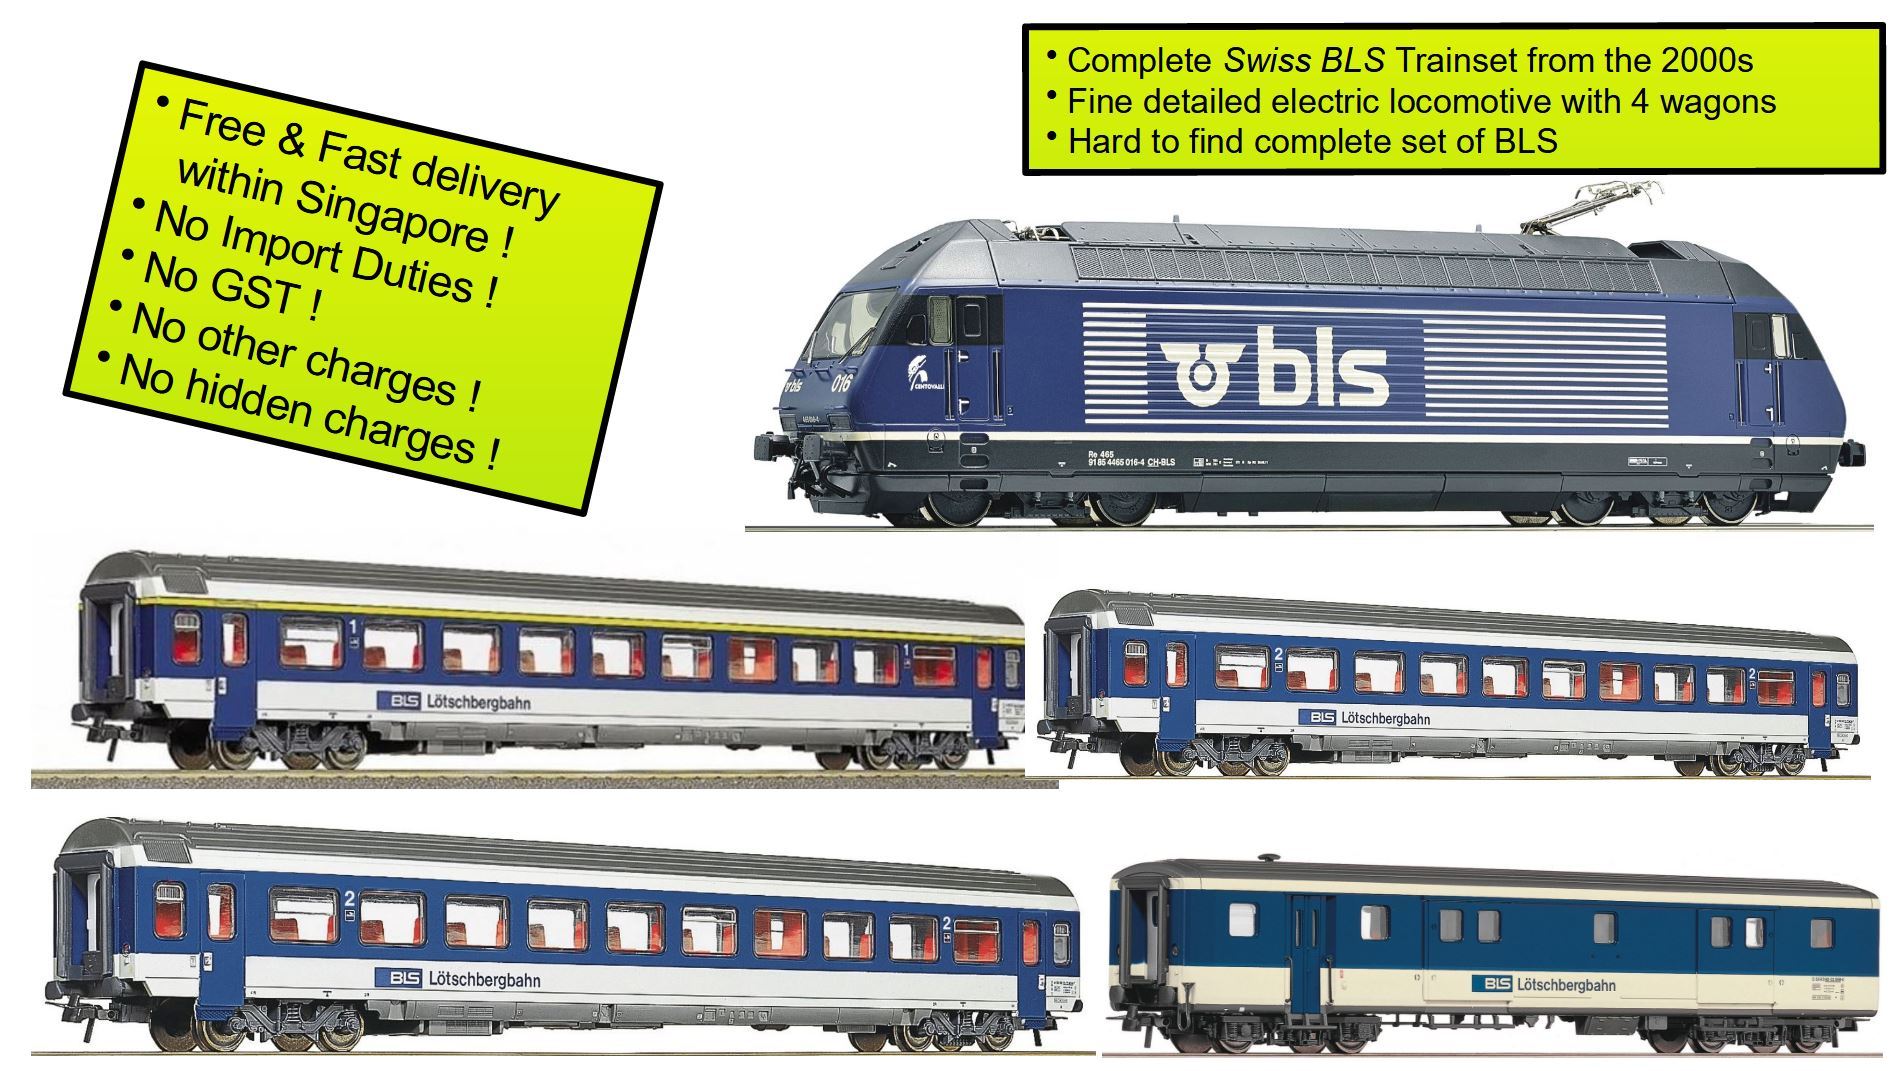 Roco 72397 srbu H0 Swiss Trainset With Locomotive And 4 Cars, Ep V 2000s, BLS